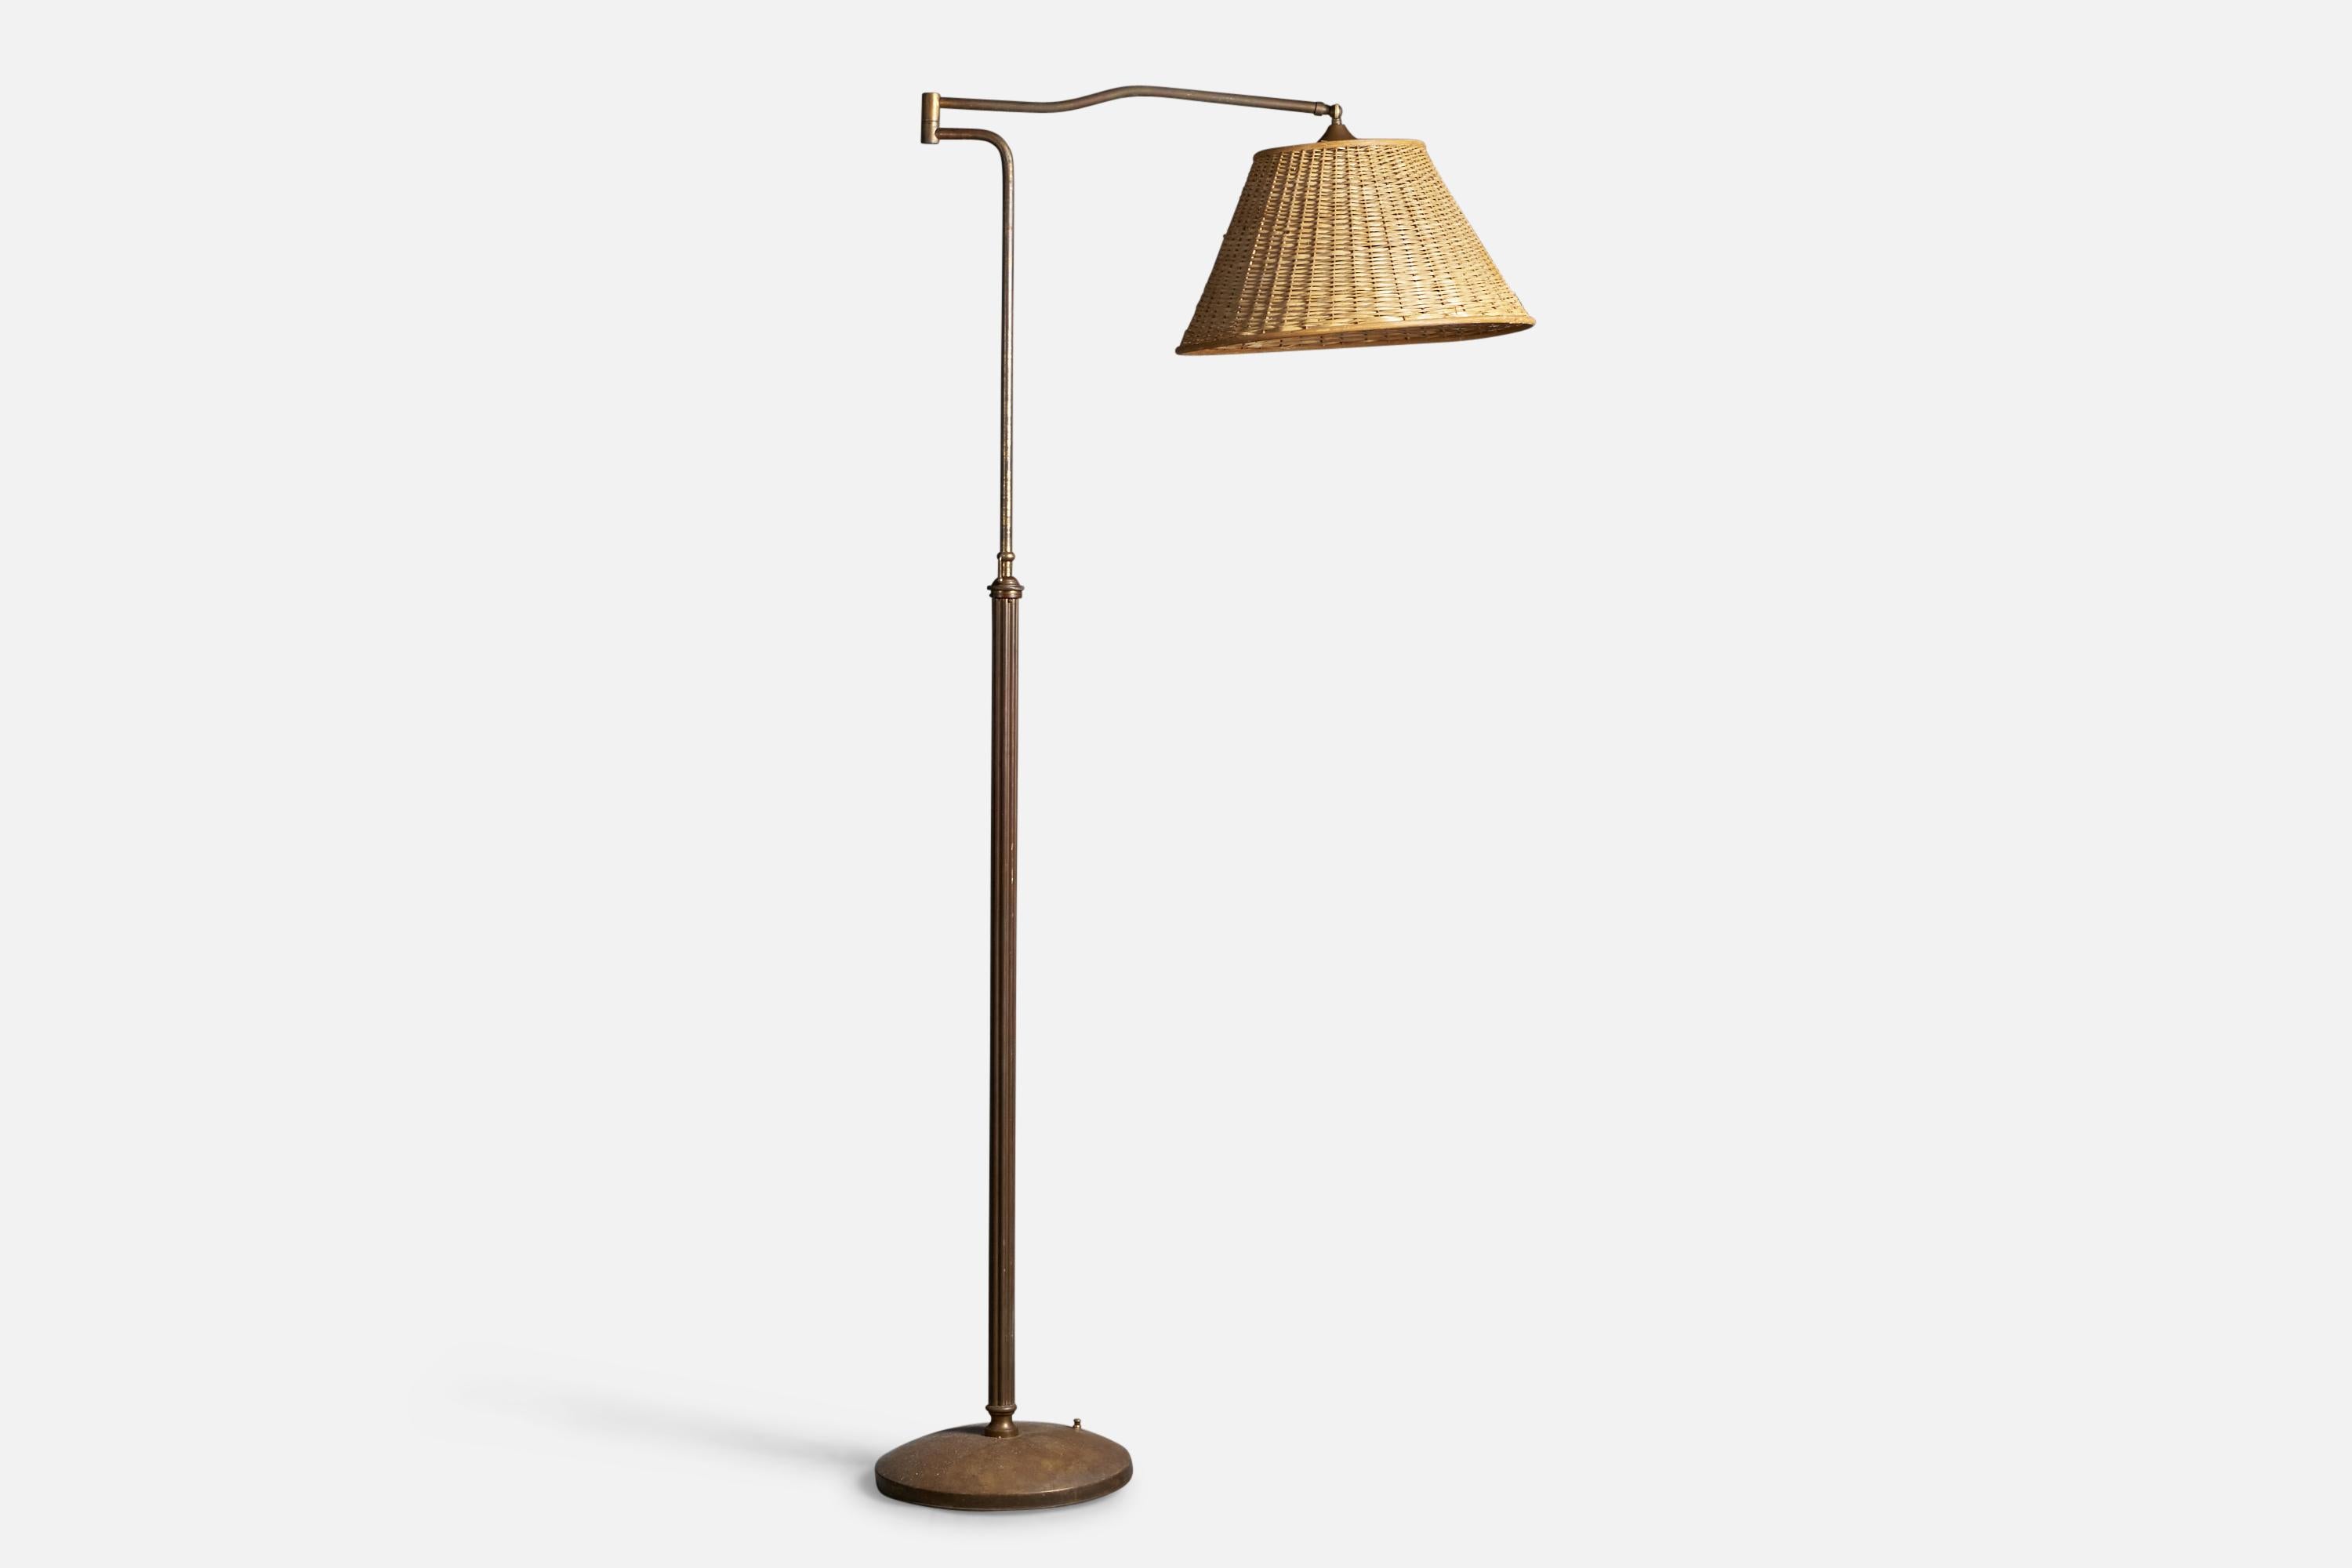 An adjustable brass and rattan floor lamp designed and produced in Italy, 1940s.

Overall Dimensions: 72.25